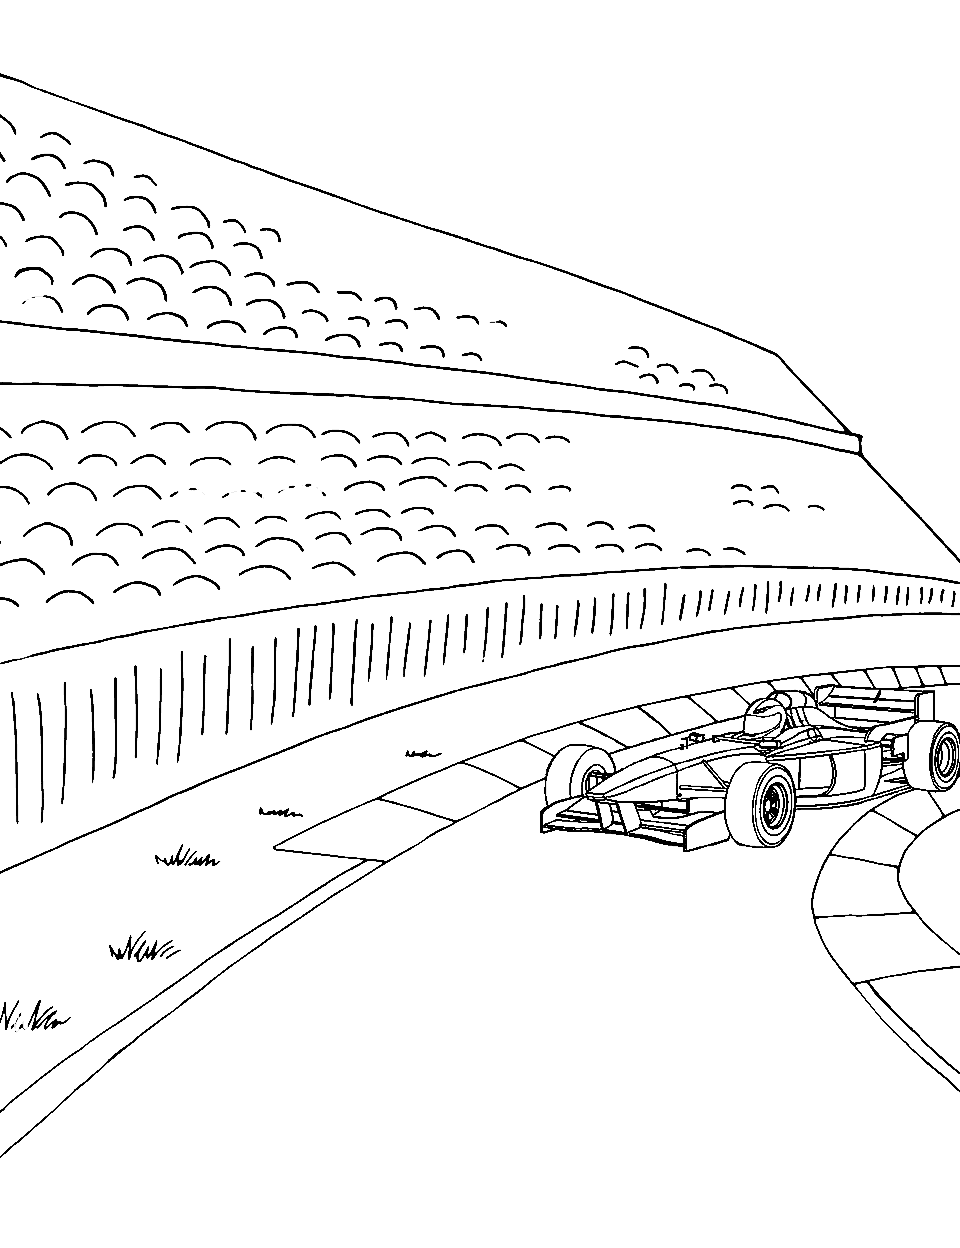 Formula One Racer Race Car Coloring Page - An F1 race car racing on a circuit.